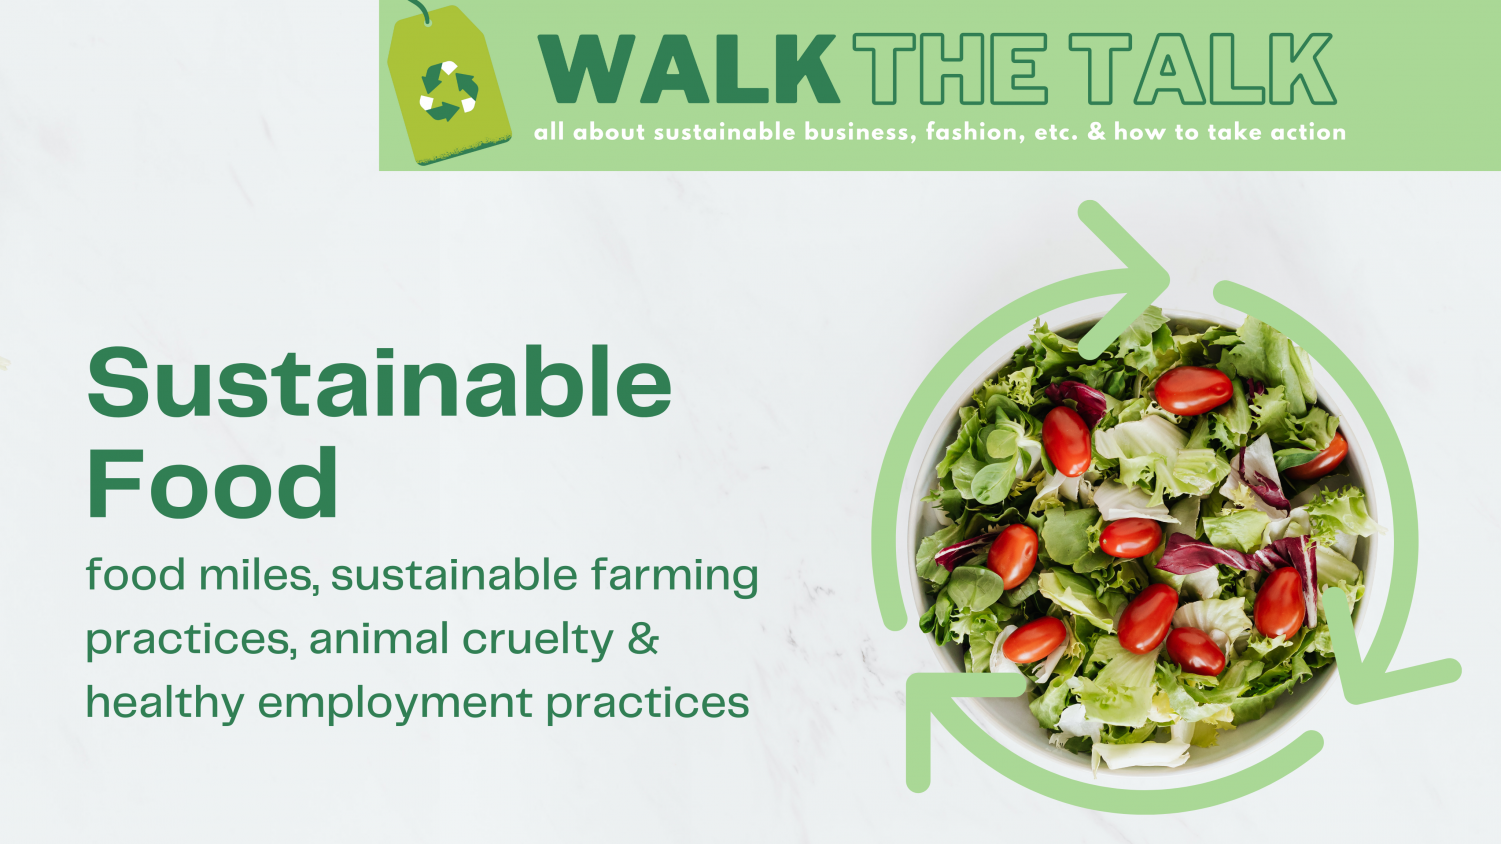 Sustainable food practices